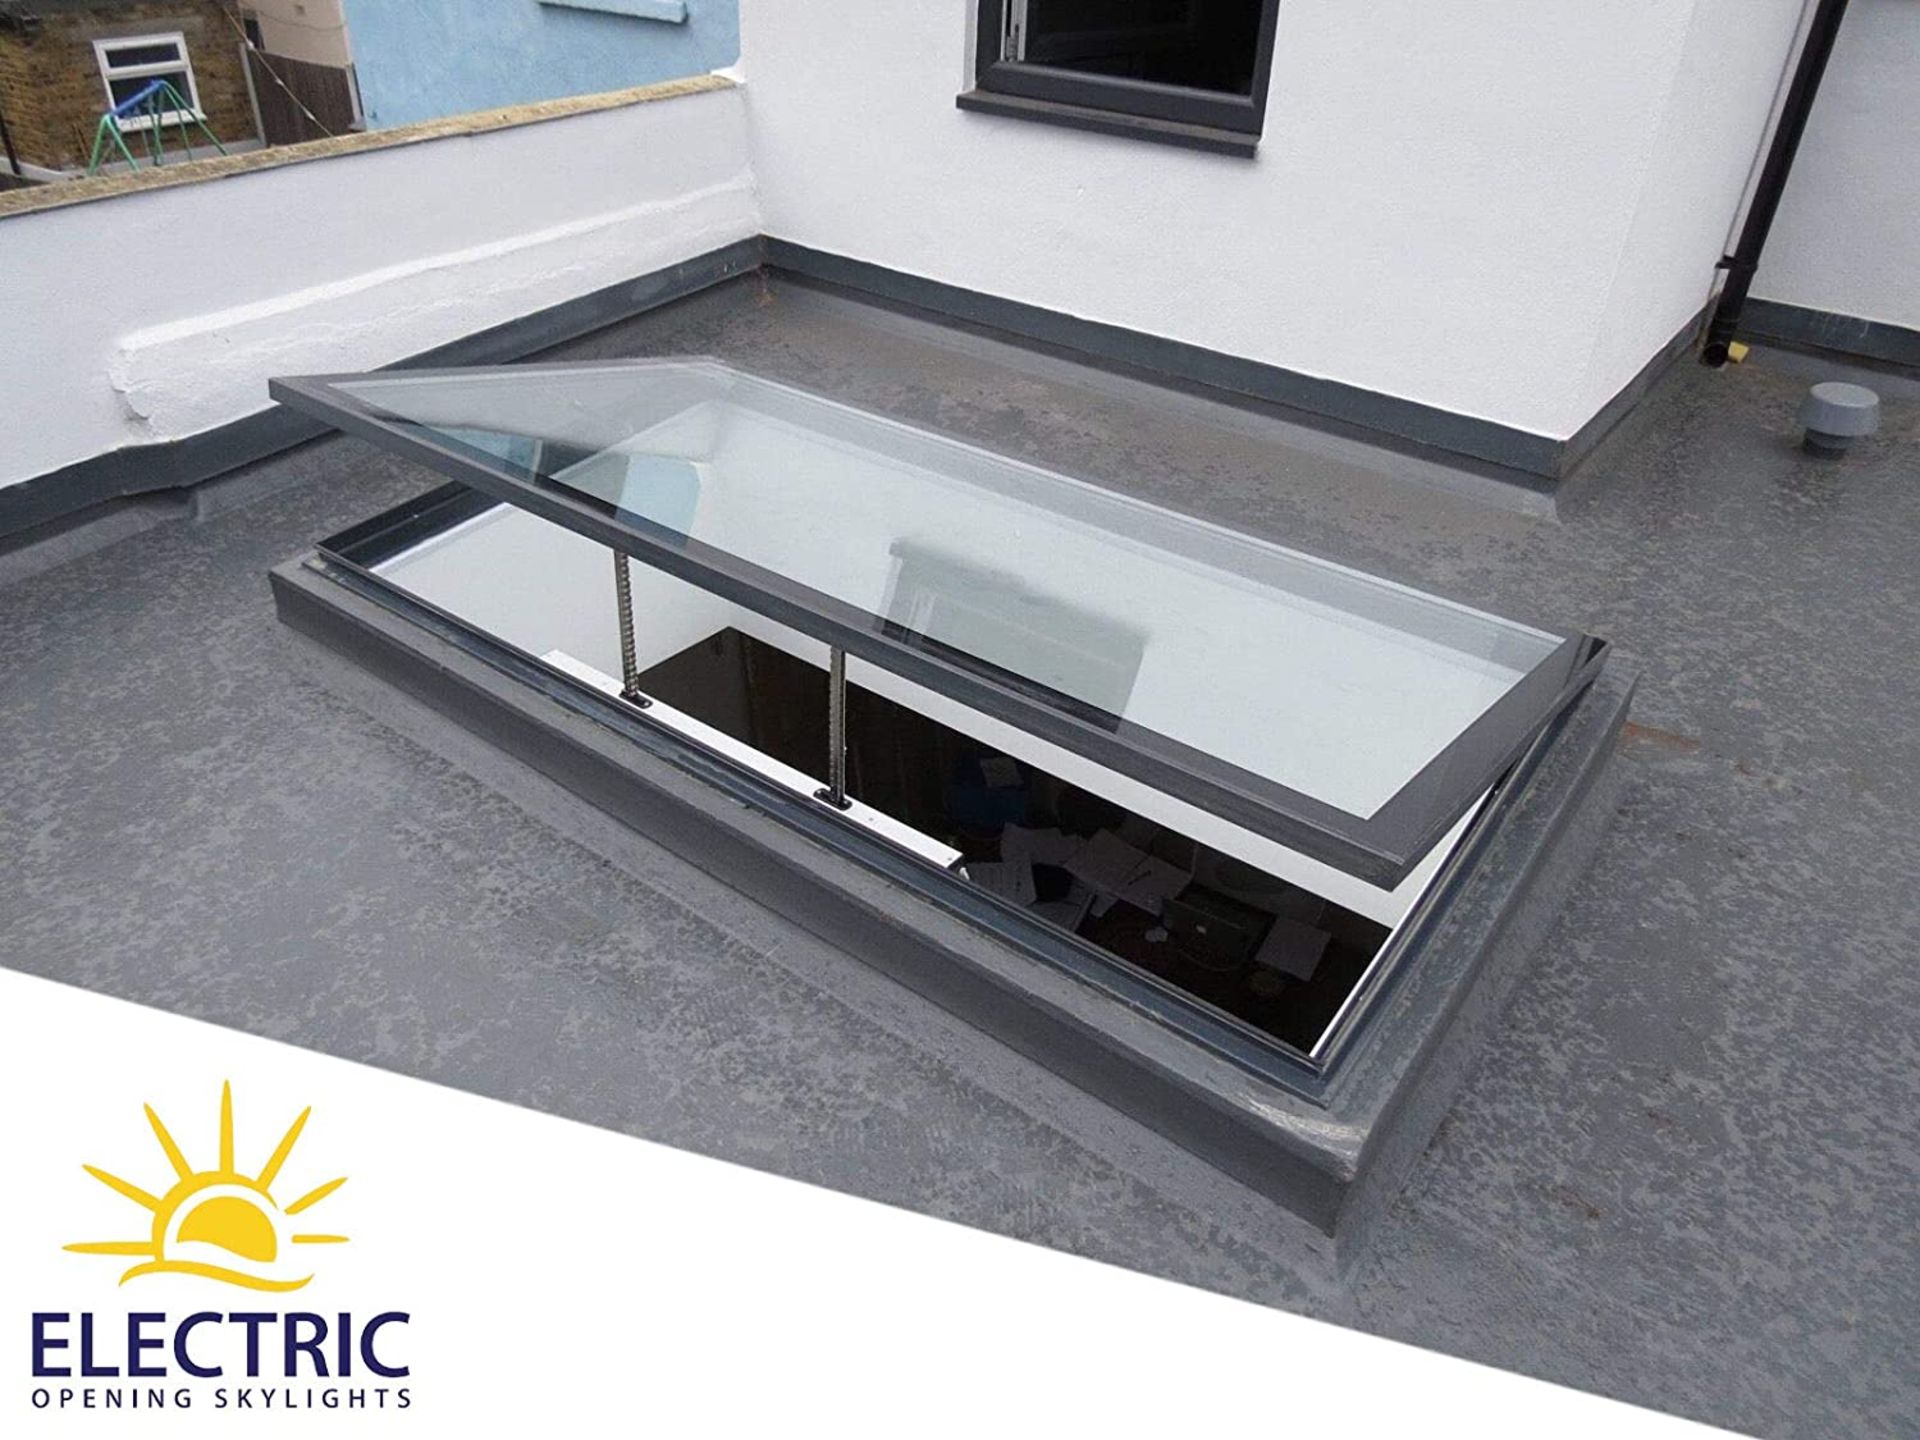 Panoroof (EOS)Electric Opening Skylight 1200x1200mm - Aluminiun Frame Double Glazed Laminated Self-